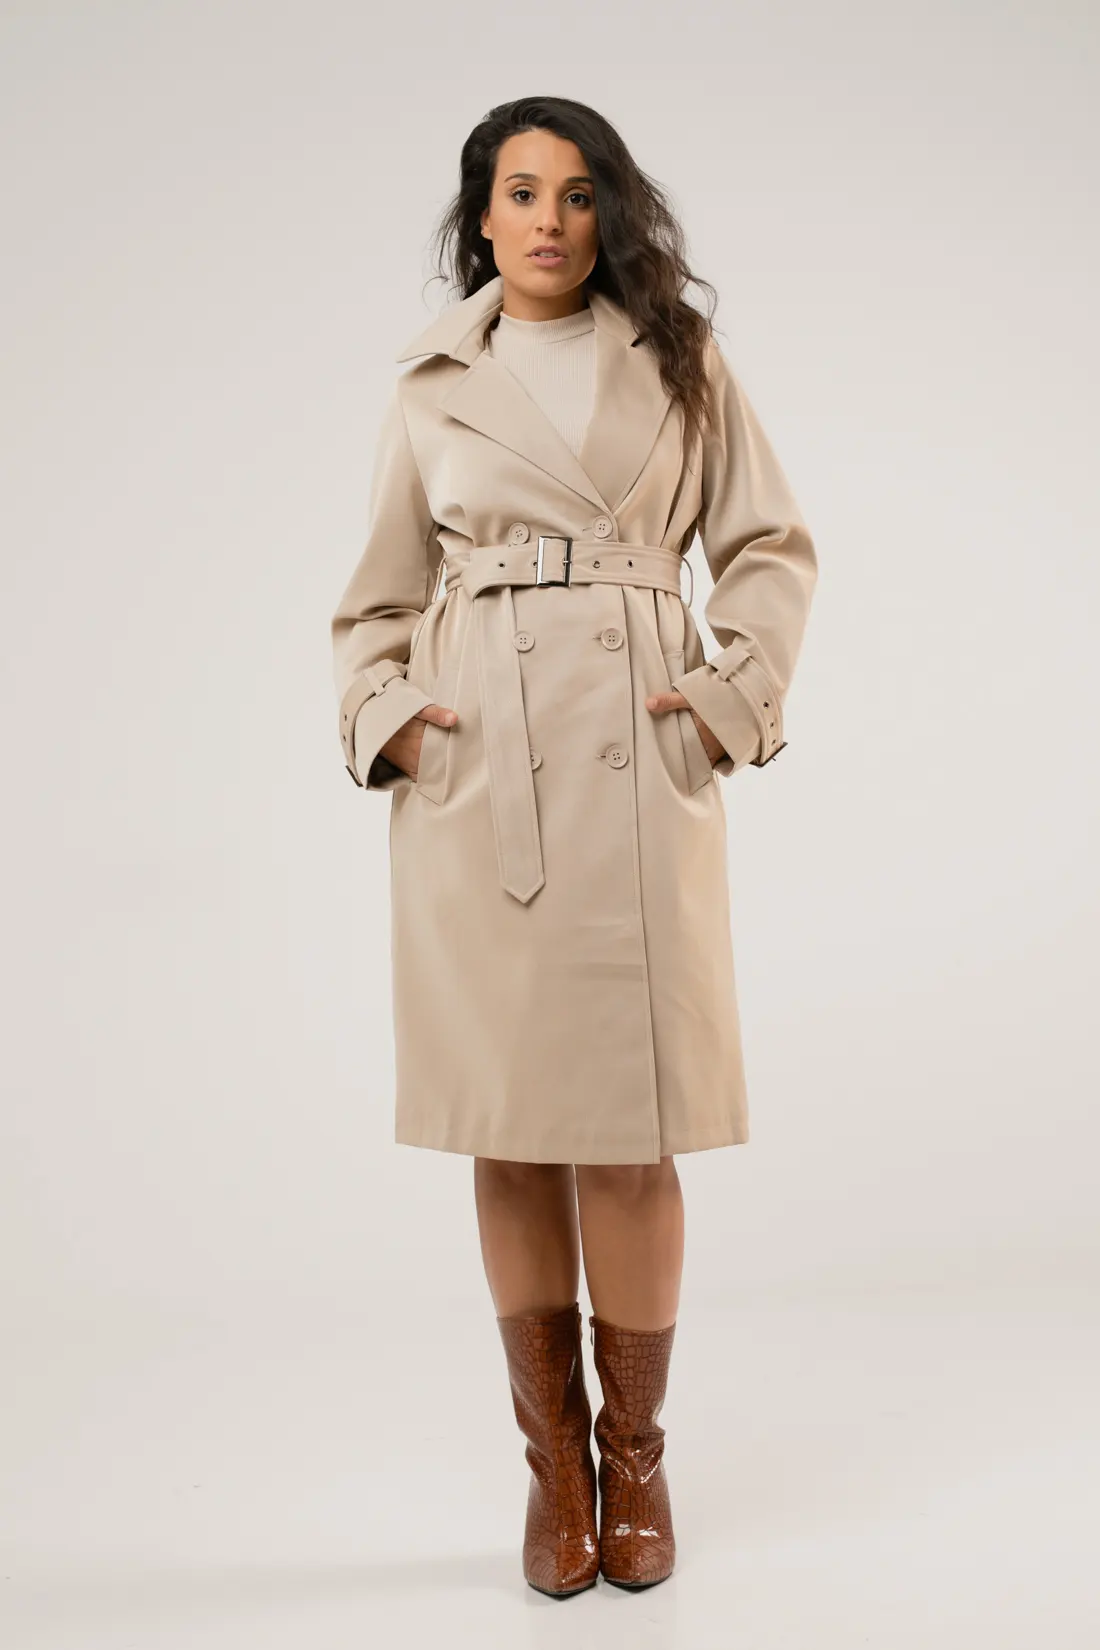 DASMO TRENCH COAT - BEGE